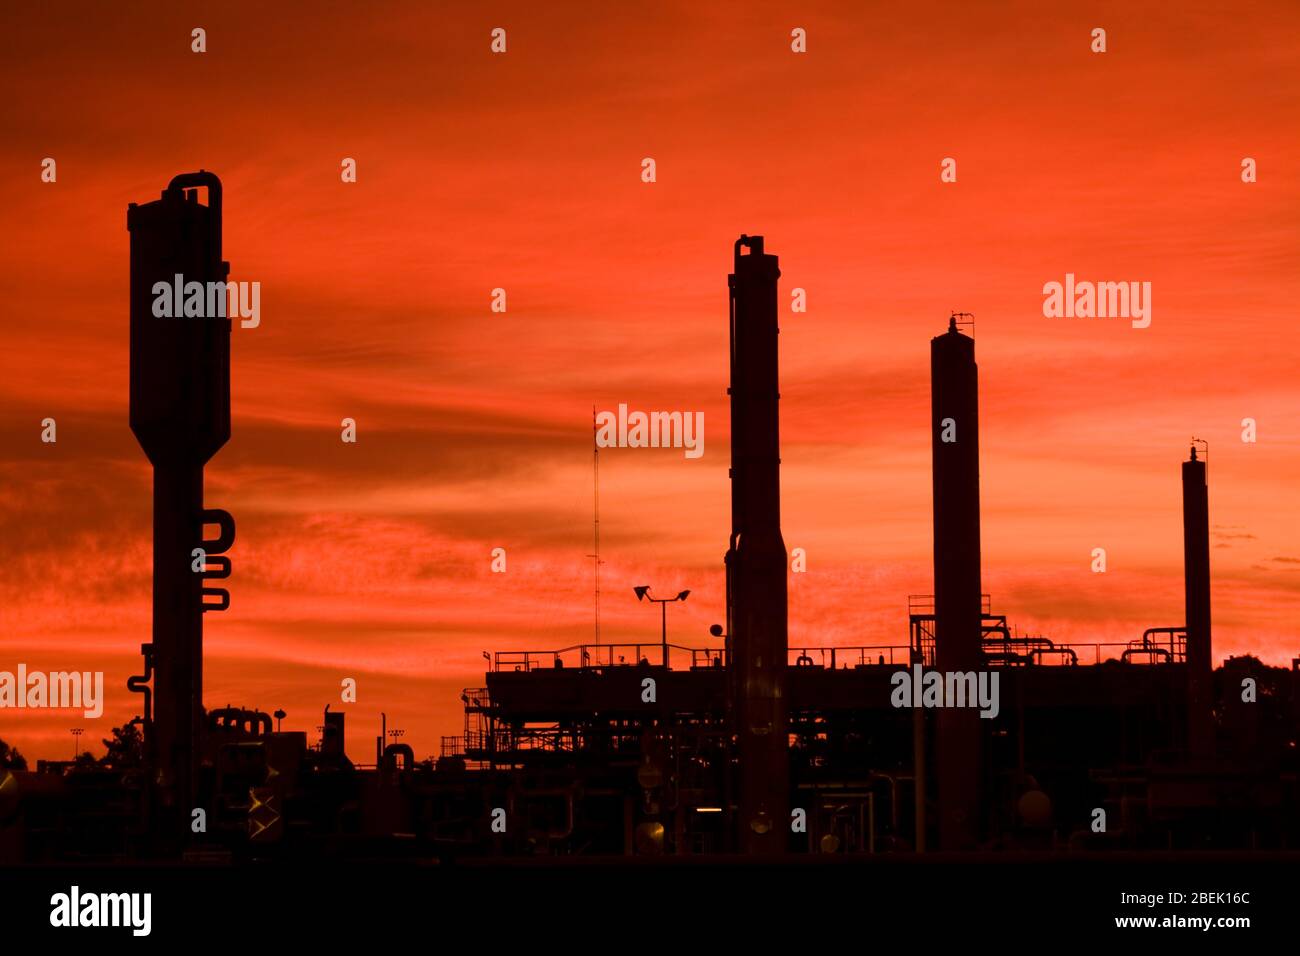 Industry silhouetted against an orange sky. Stock Photo